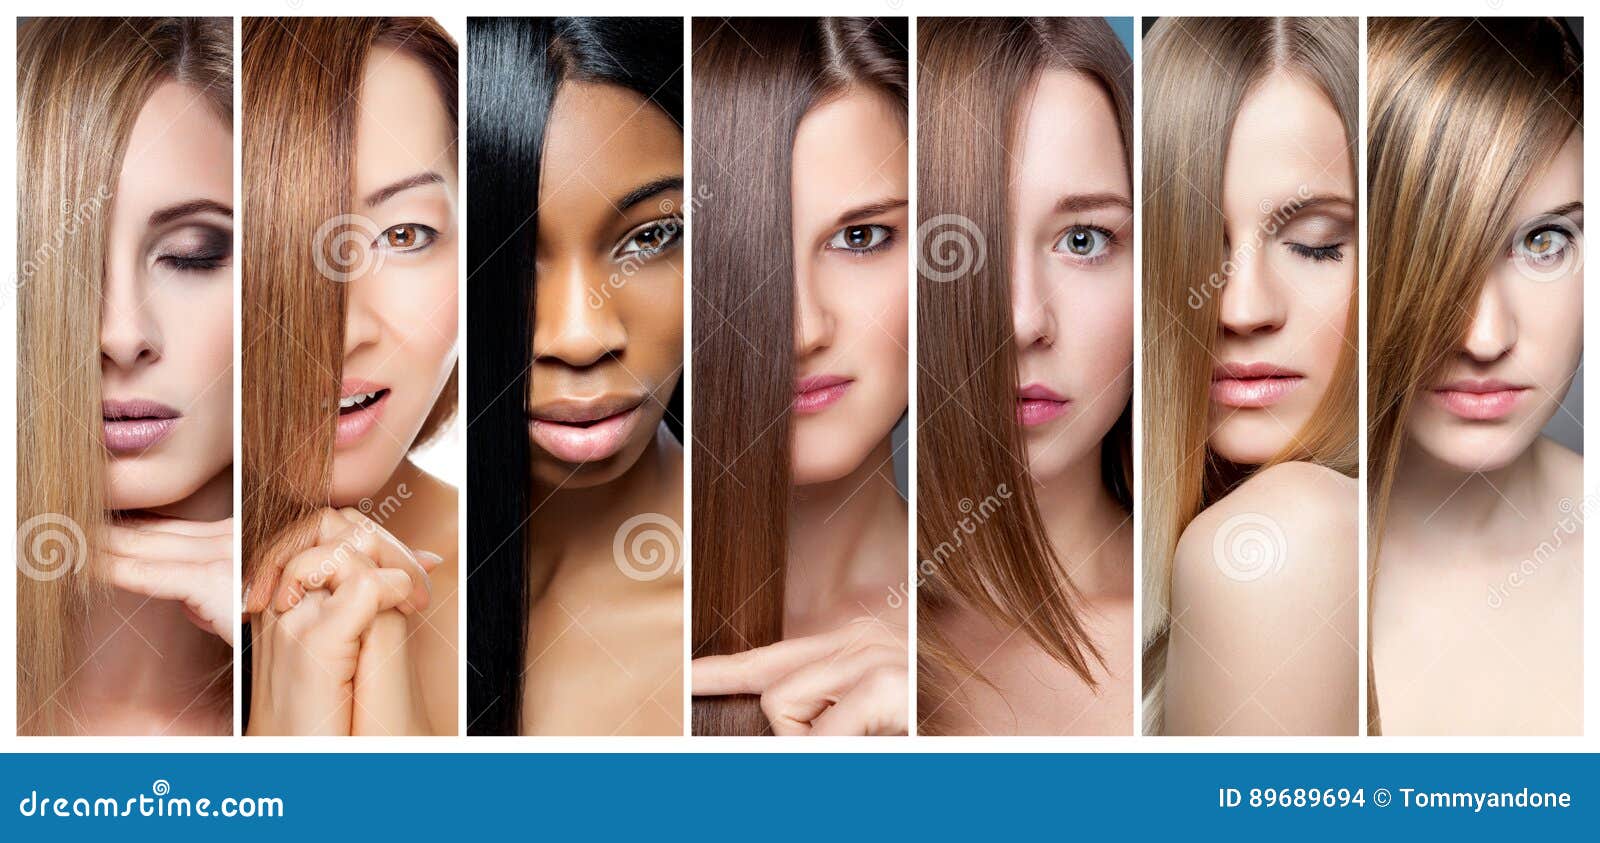 collage of women with various hair color, skin tone and complexion